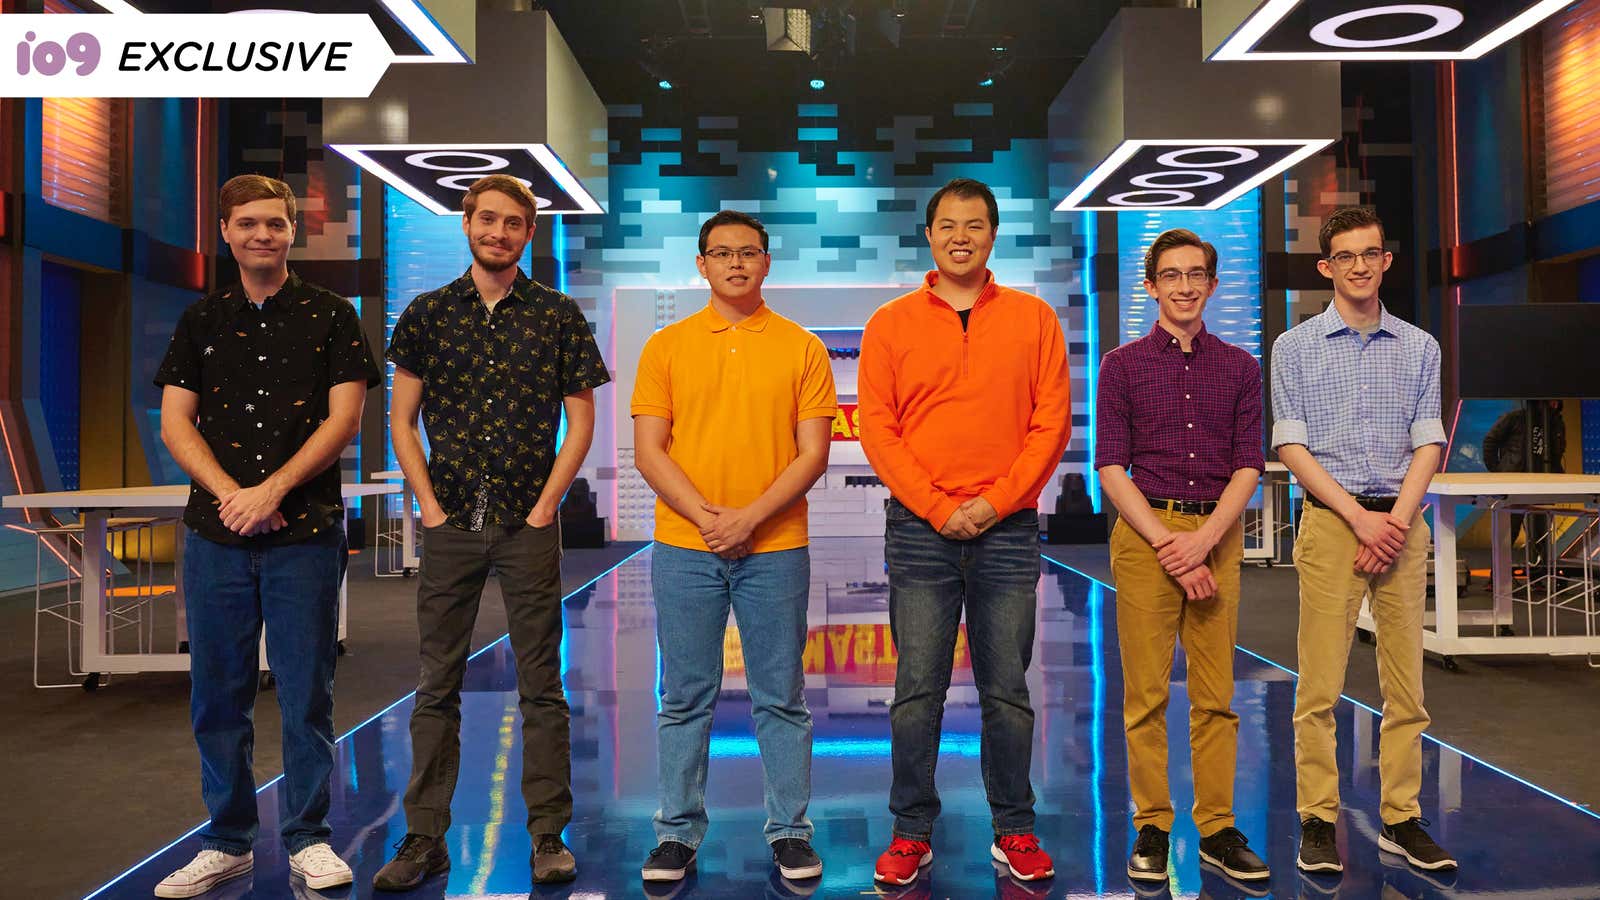 Steven and Mark Erickson, Zack and Wayne Macasaet, and Caleb and Jacob Schilling were the finalists of Lego Masters season two.